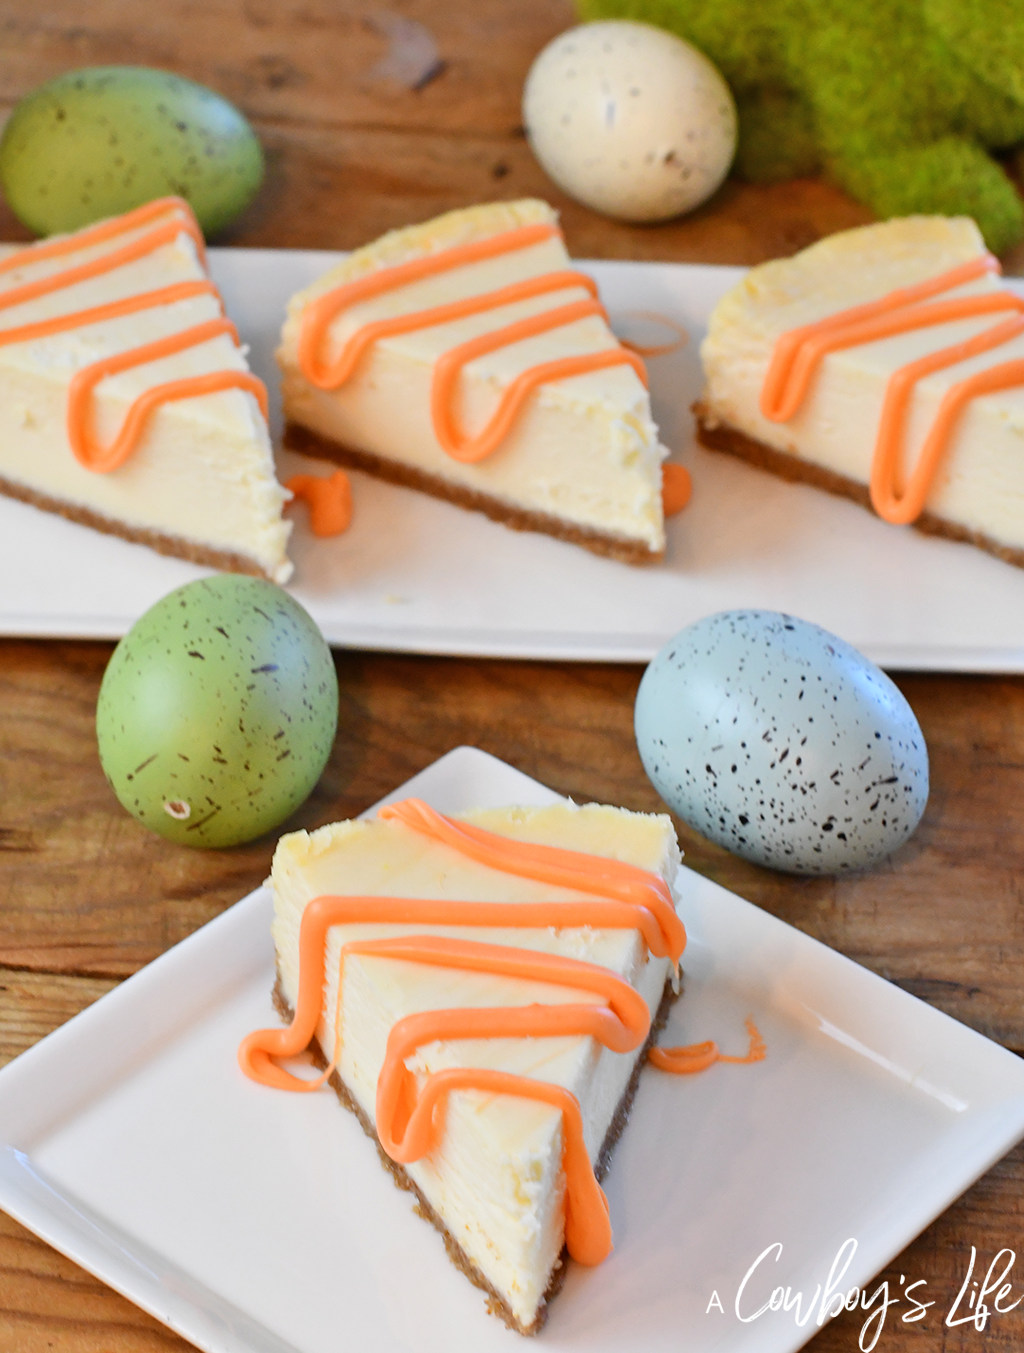 Tips on how to host an Easter brunch #easter #easterbrunch #brunch #partyideas